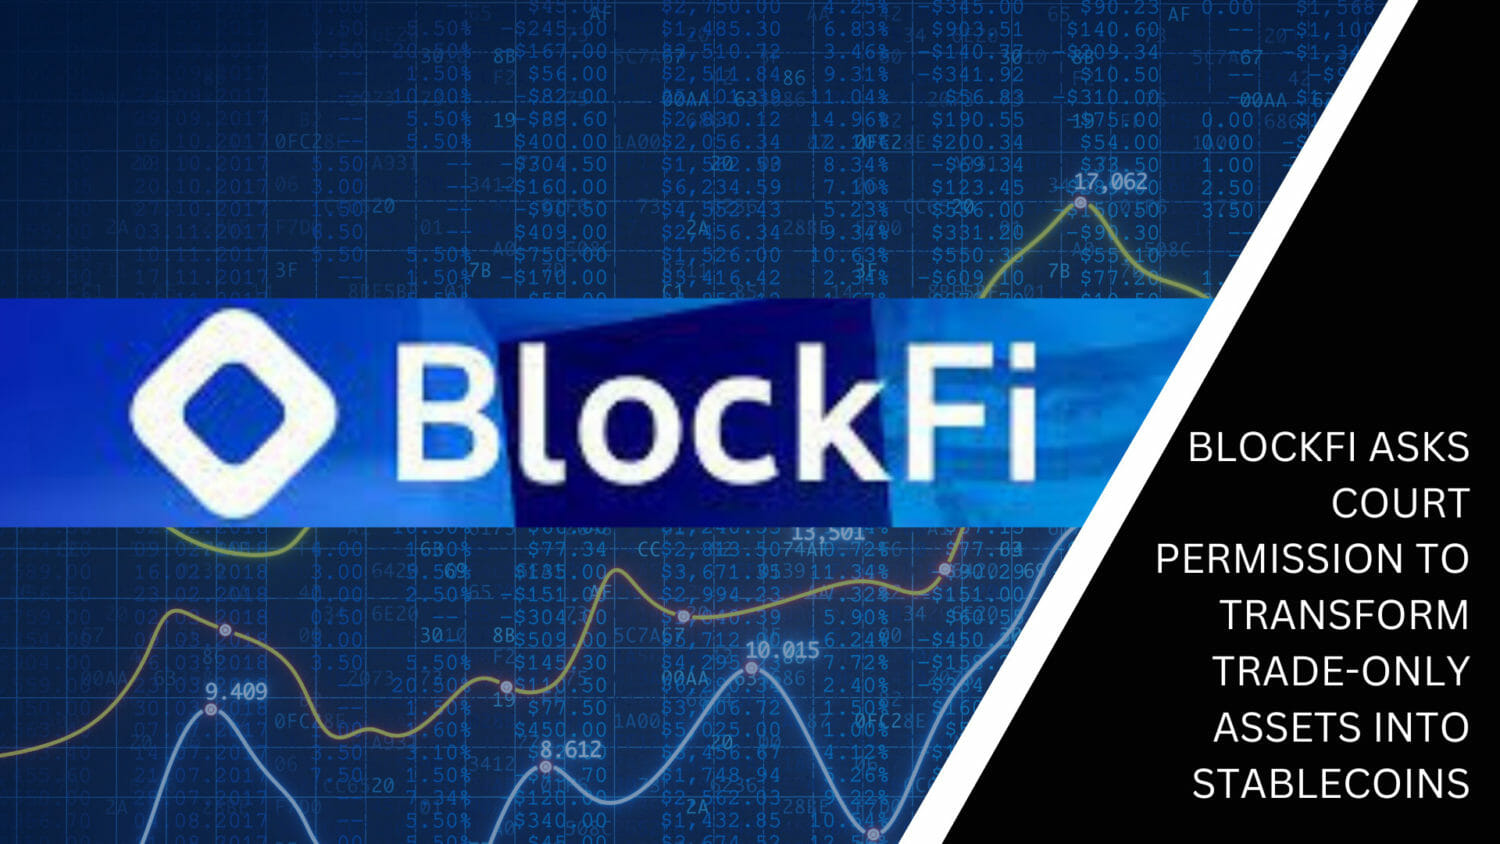 Blockfi Asks Court Permission To Transform Trade-Only Assets Into Stablecoins